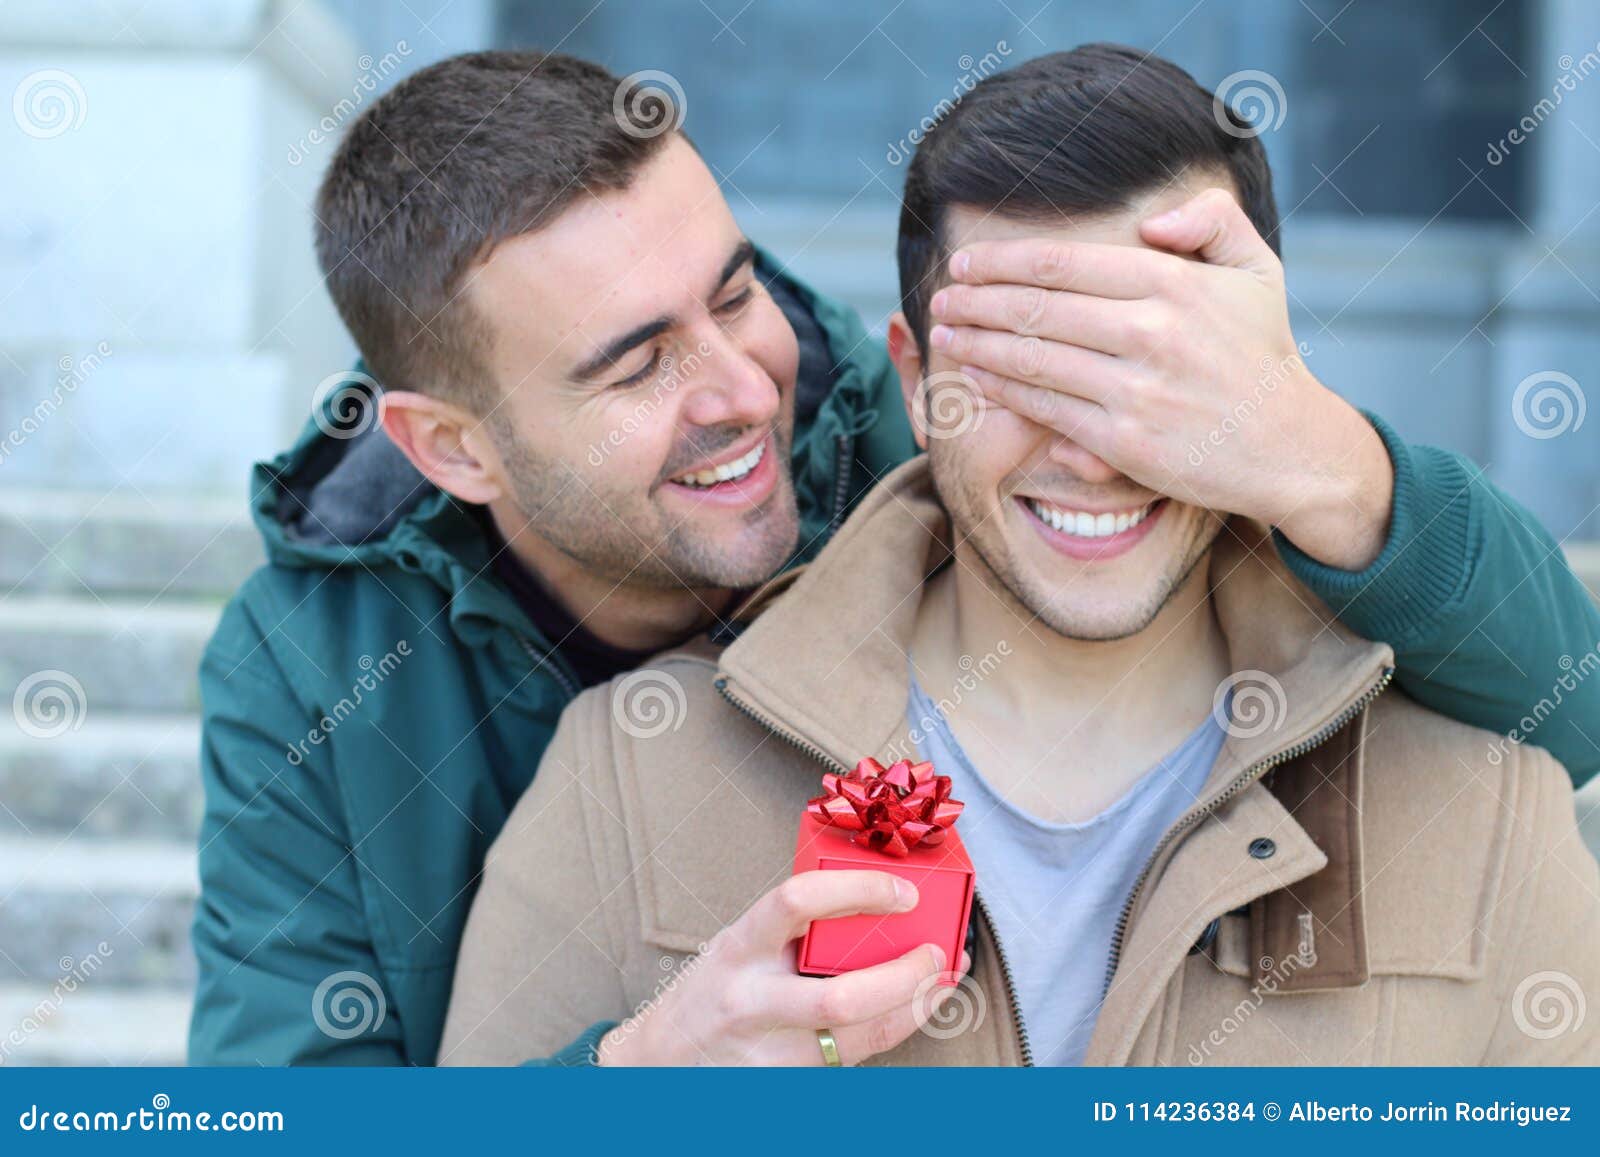 Lovely Same Sex Couple Sharing Affection Stock Photo picture